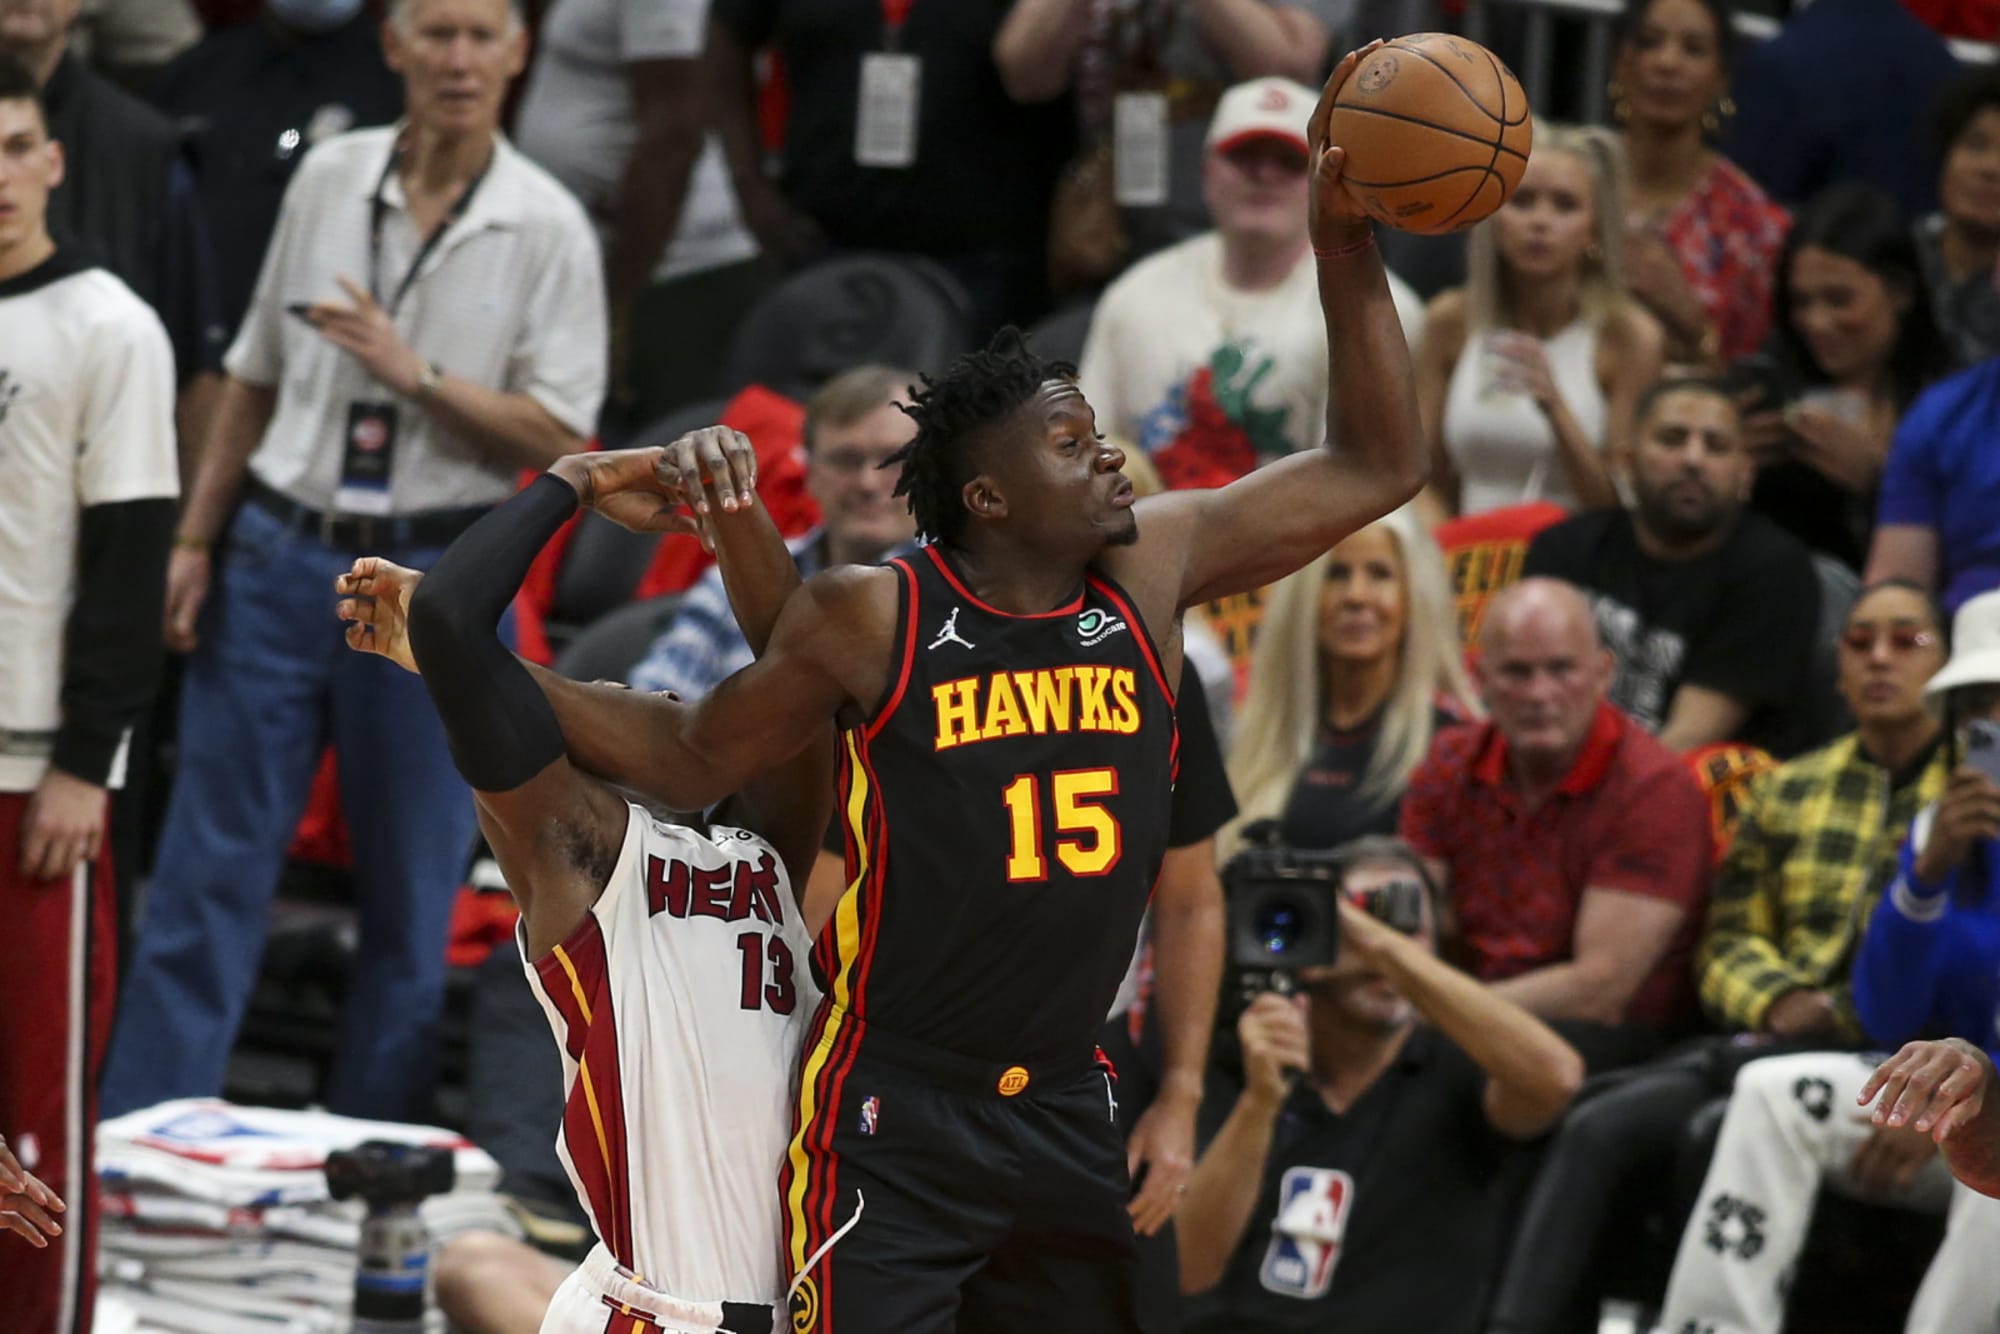 Get to know Atlanta Hawks center Clint Capela, the Swiss Bank